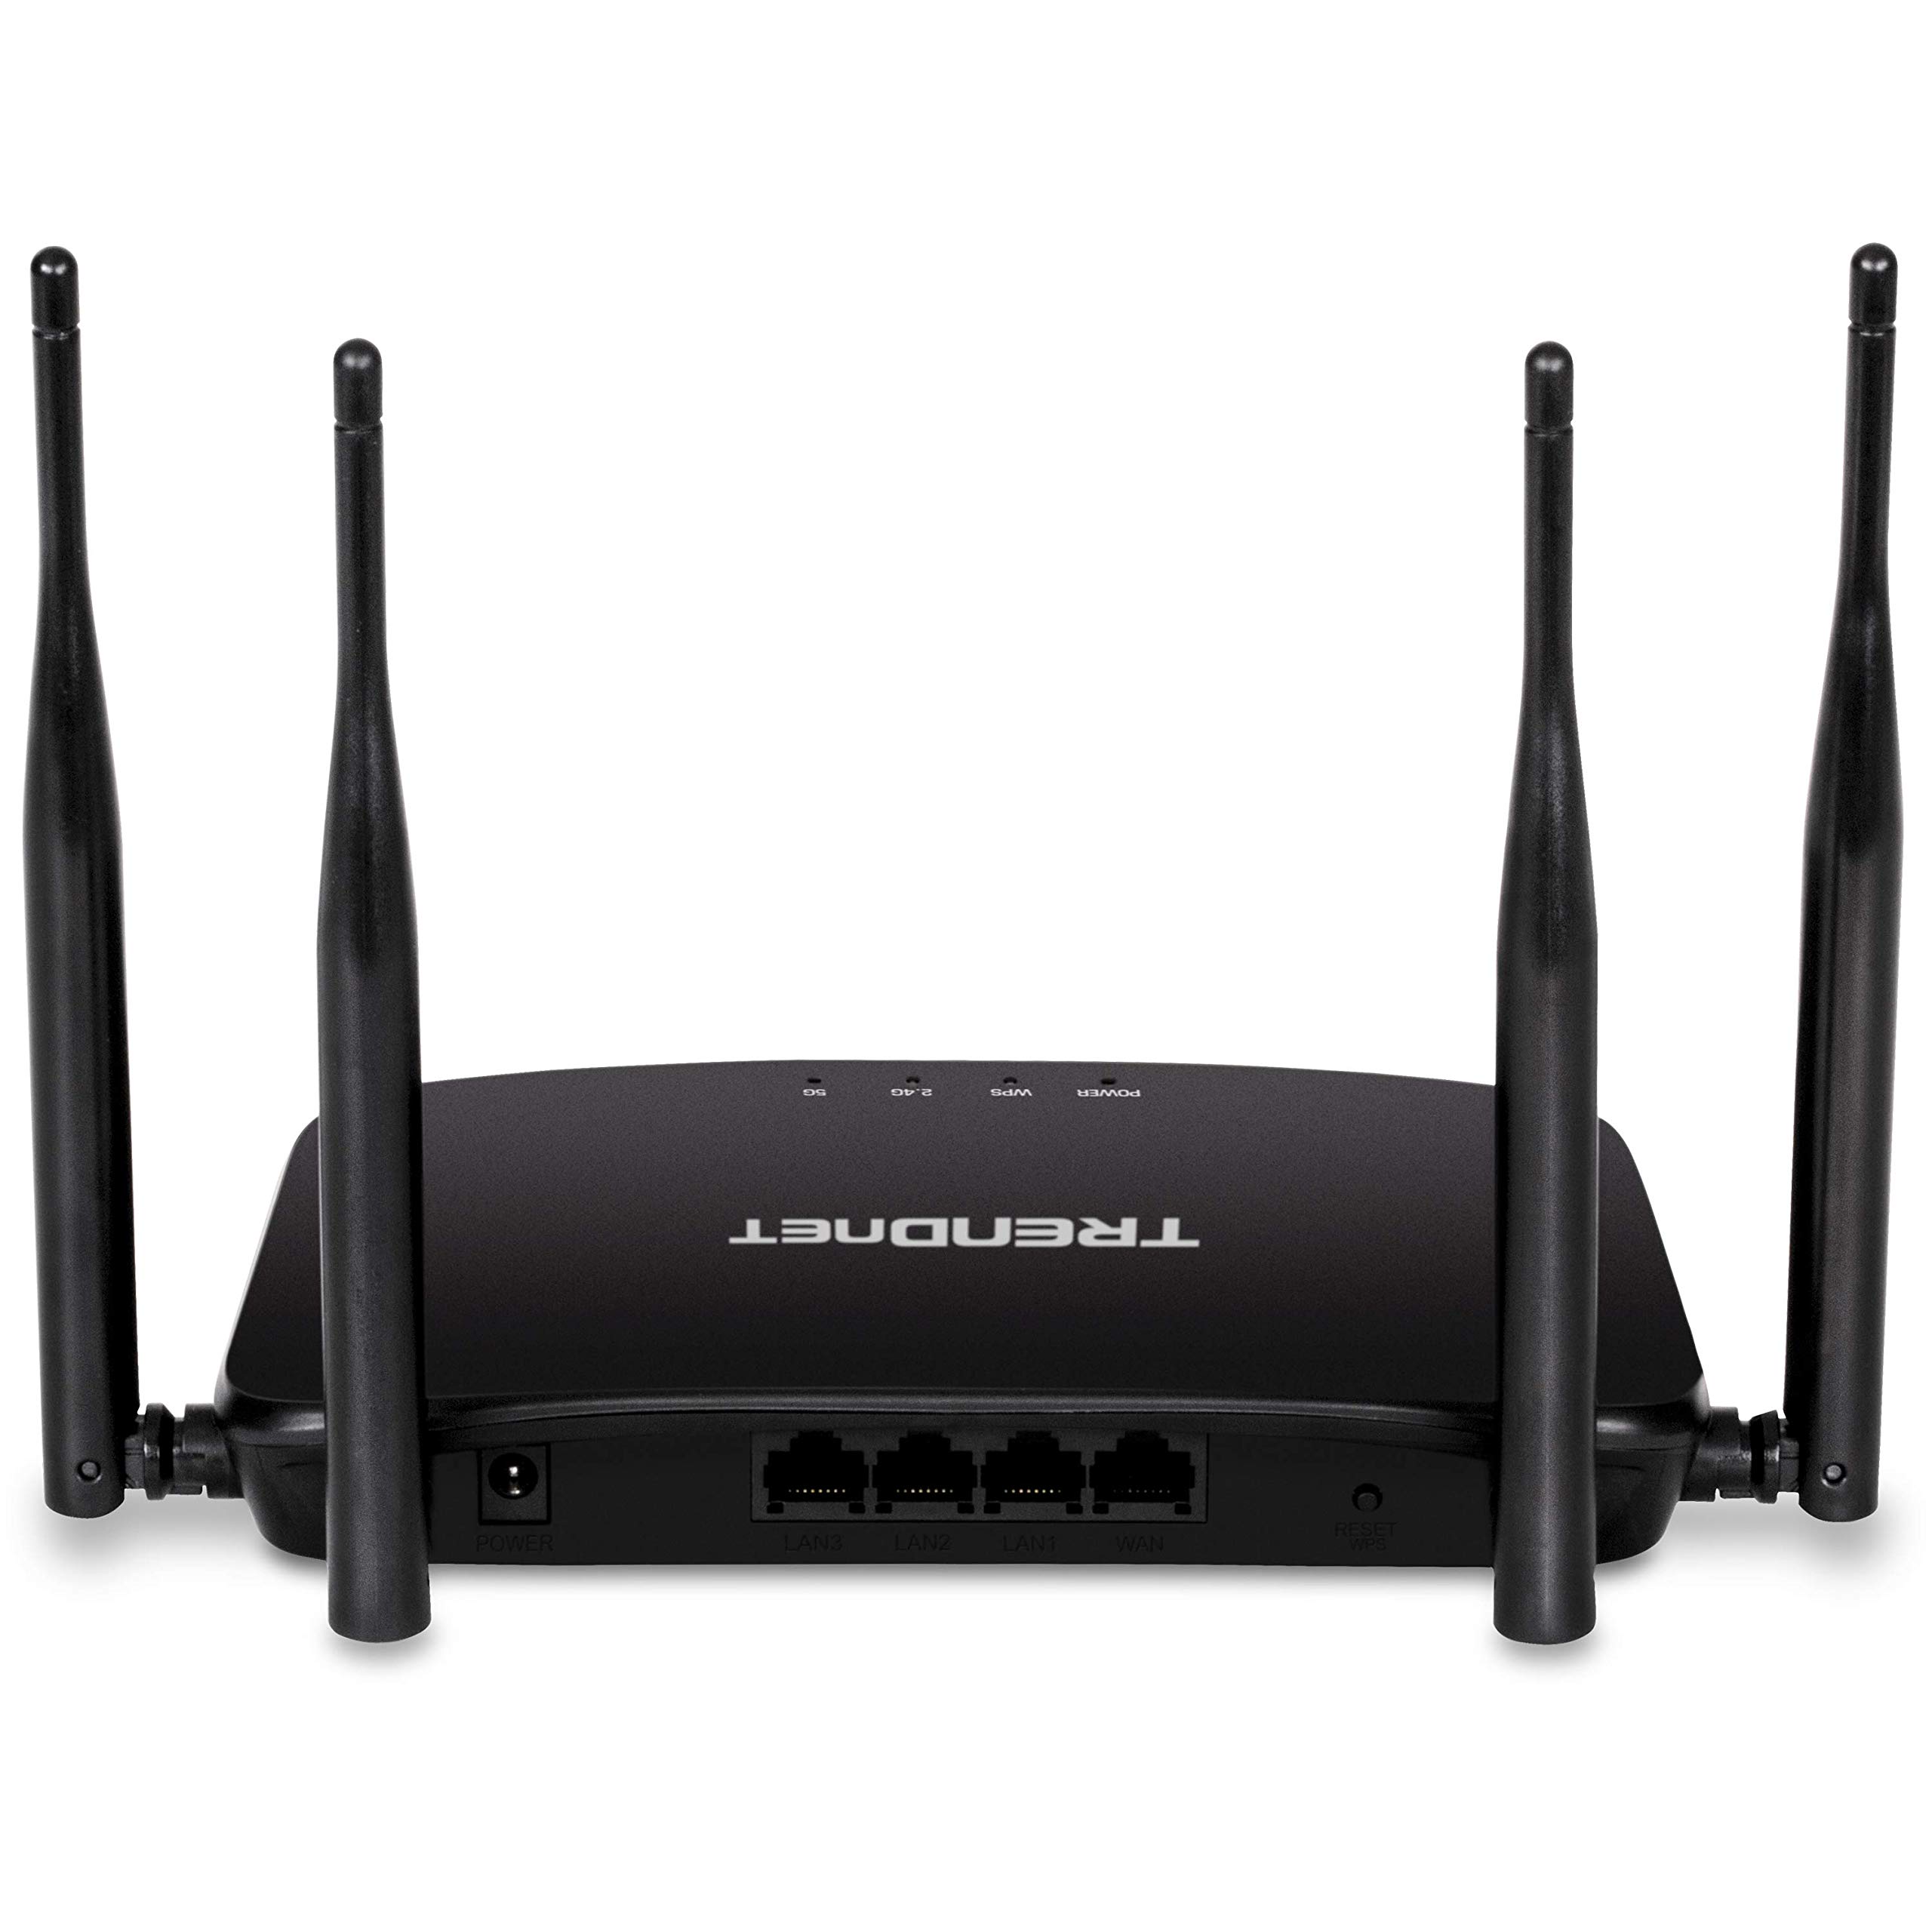 TRENDnet AC1200 Dual Band WiFi Router, TEW-831DR (Renewed)